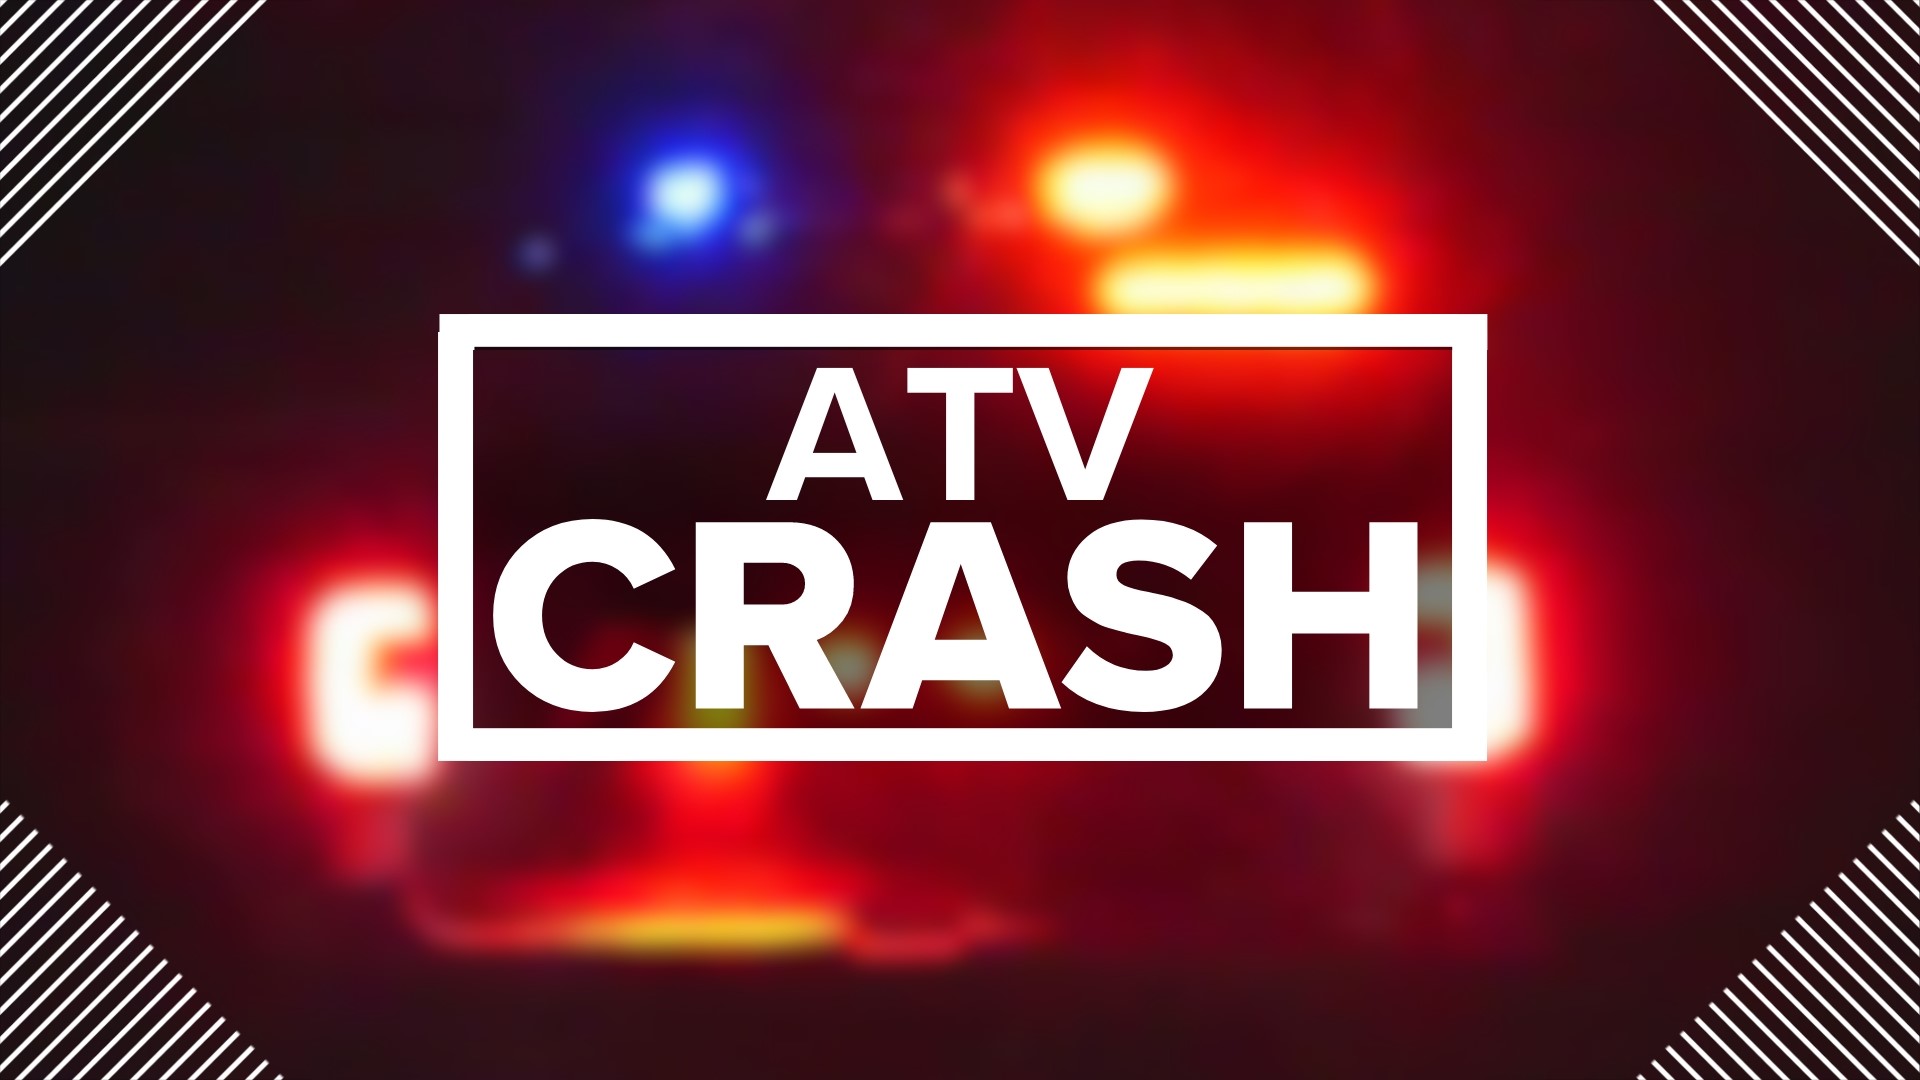 The fatal crash happened just before 1:30 a.m. Saturday on Metzger Marsh State Road near Bono Road in Jerusalem Township. Timothy Weiland, 45, died at the scene.